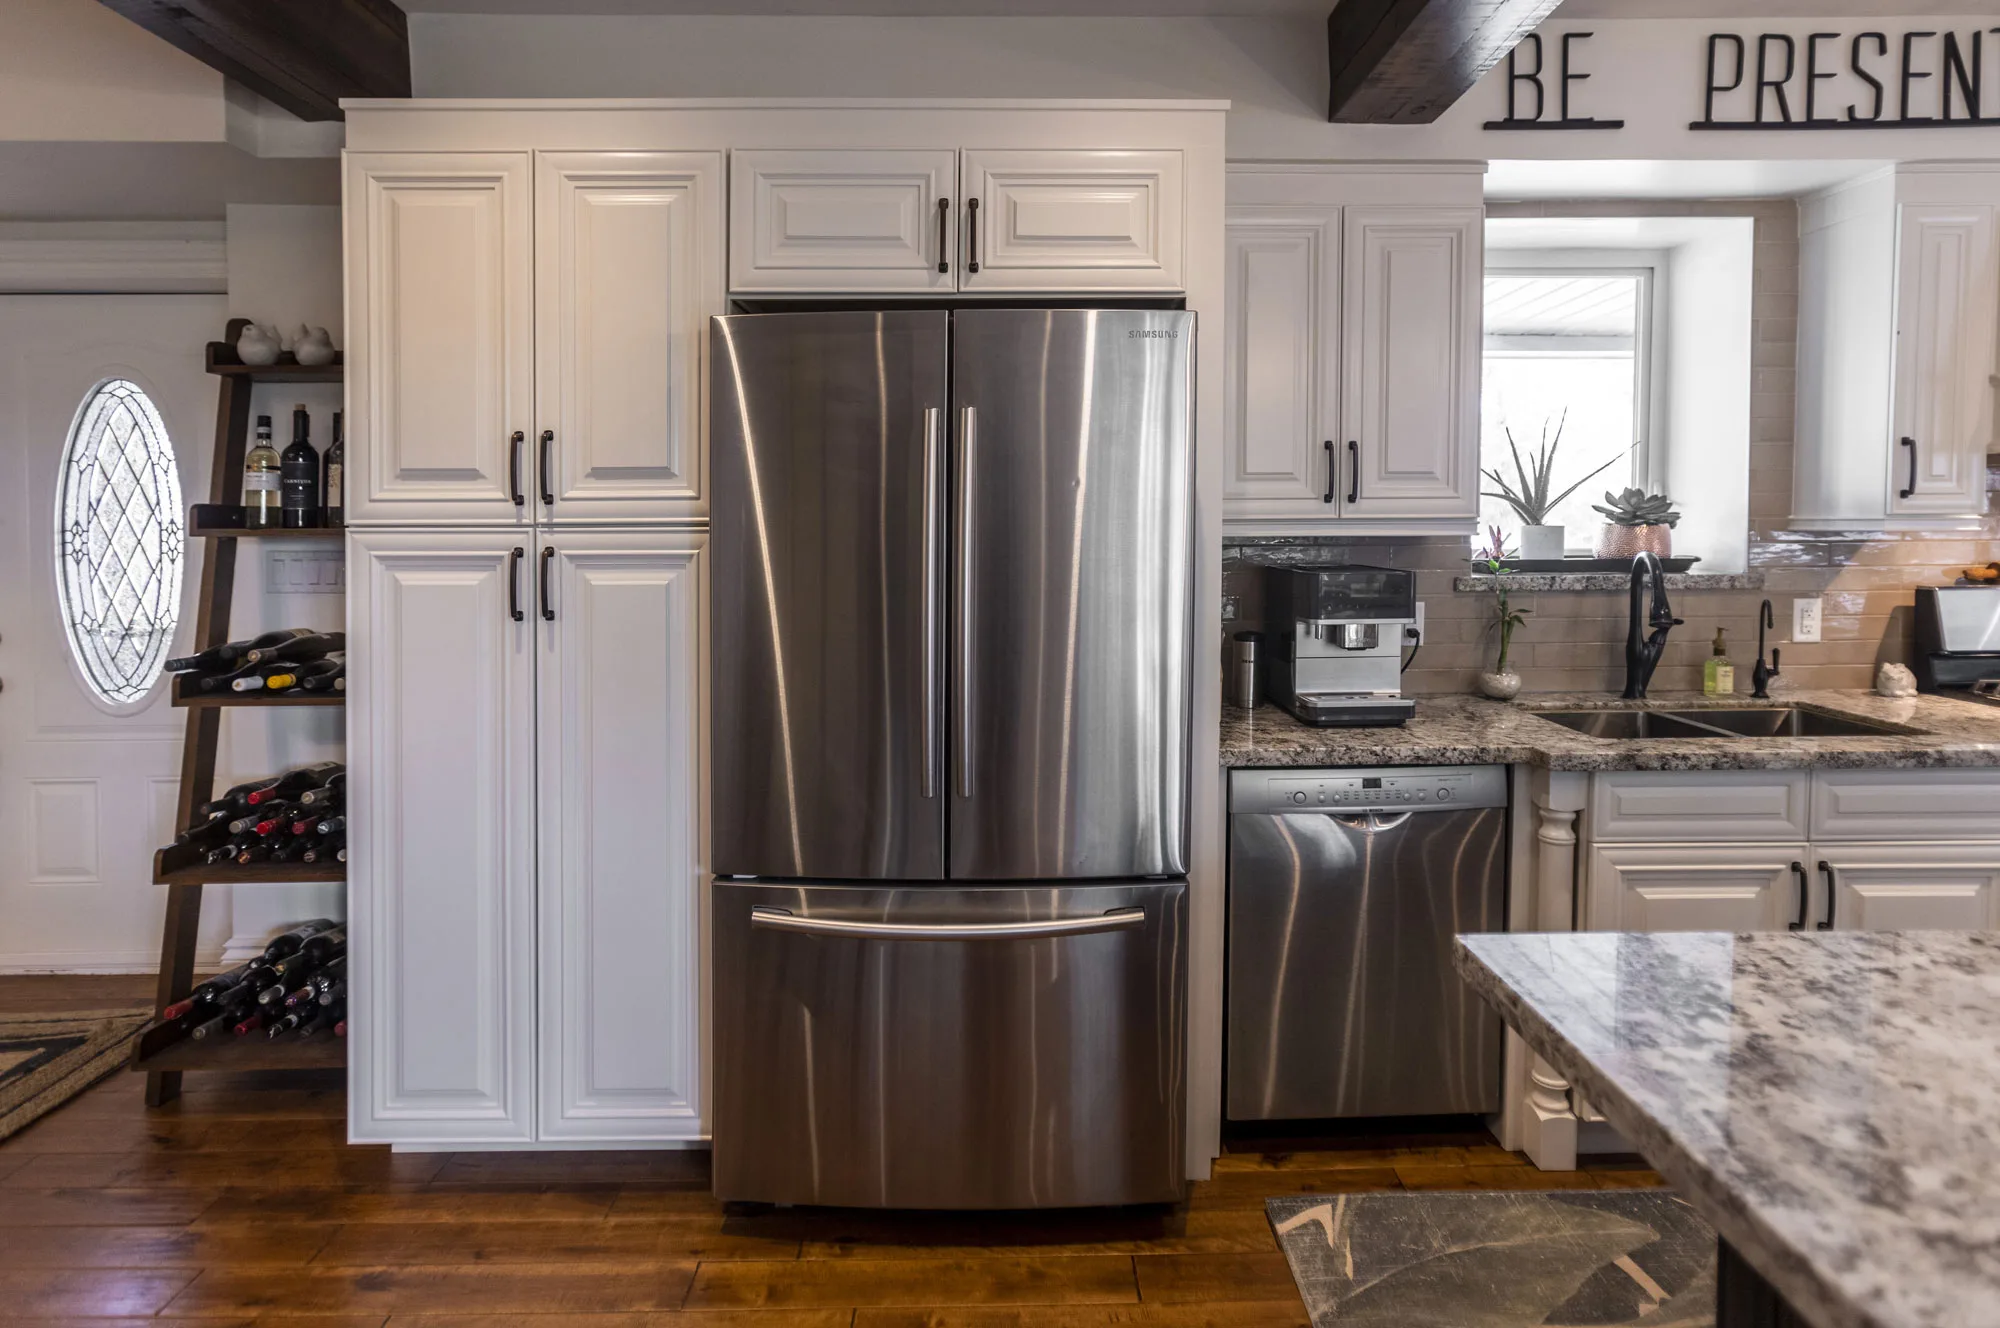 A beautiful white cupboards and black handles and stainless steel fridge and dishwasher.